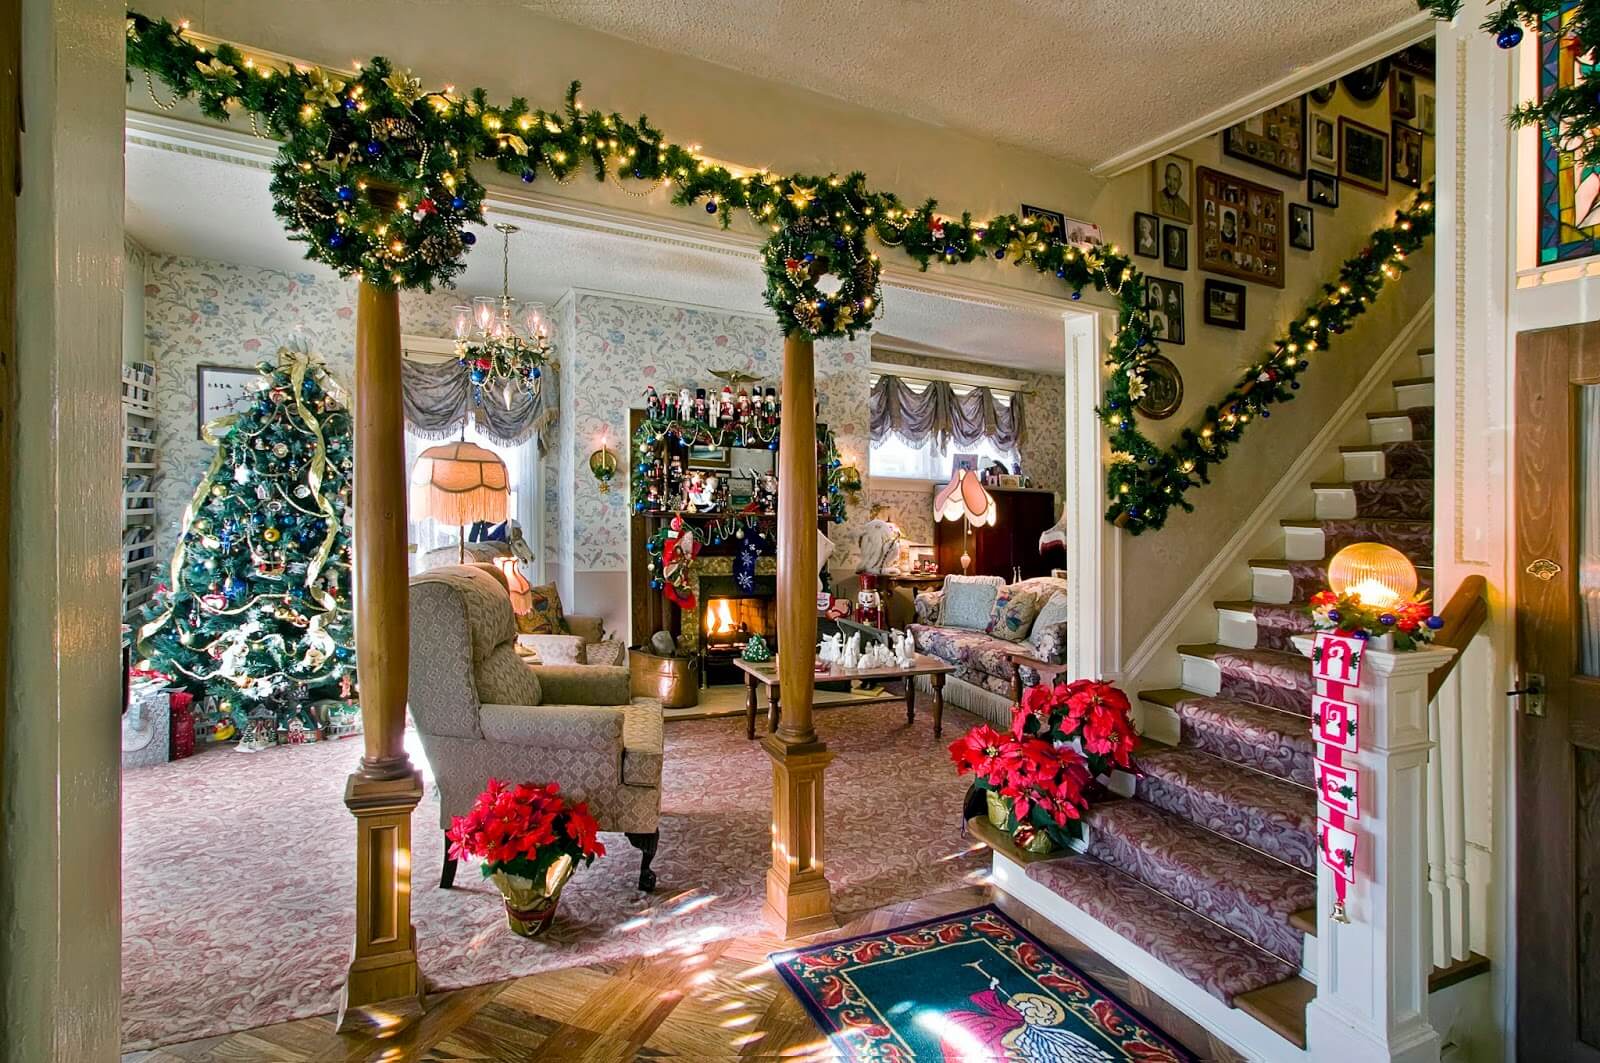 23 Best Christmas Decoration Ideas For Indoors & Outdoors